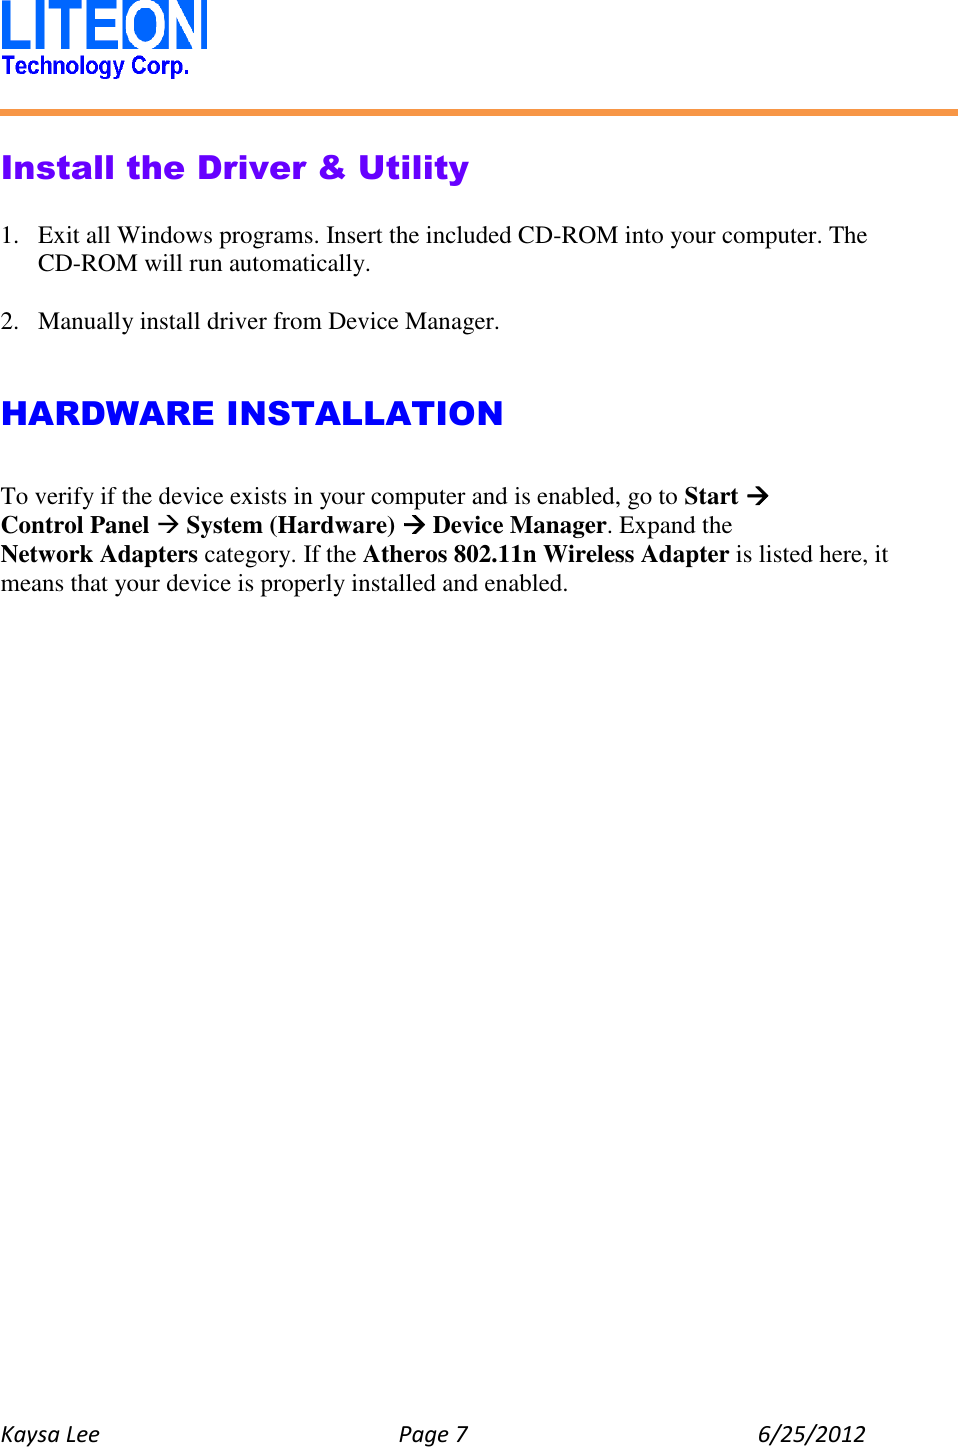   Kaysa Lee  Page 7  6/25/2012    Install the Driver &amp; Utility  1. Exit all Windows programs. Insert the included CD-ROM into your computer. The CD-ROM will run automatically.  2. Manually install driver from Device Manager.   HARDWARE INSTALLATION  To verify if the device exists in your computer and is enabled, go to Start  Control Panel  System (Hardware)  Device Manager. Expand the Network Adapters category. If the Atheros 802.11n Wireless Adapter is listed here, it means that your device is properly installed and enabled.    